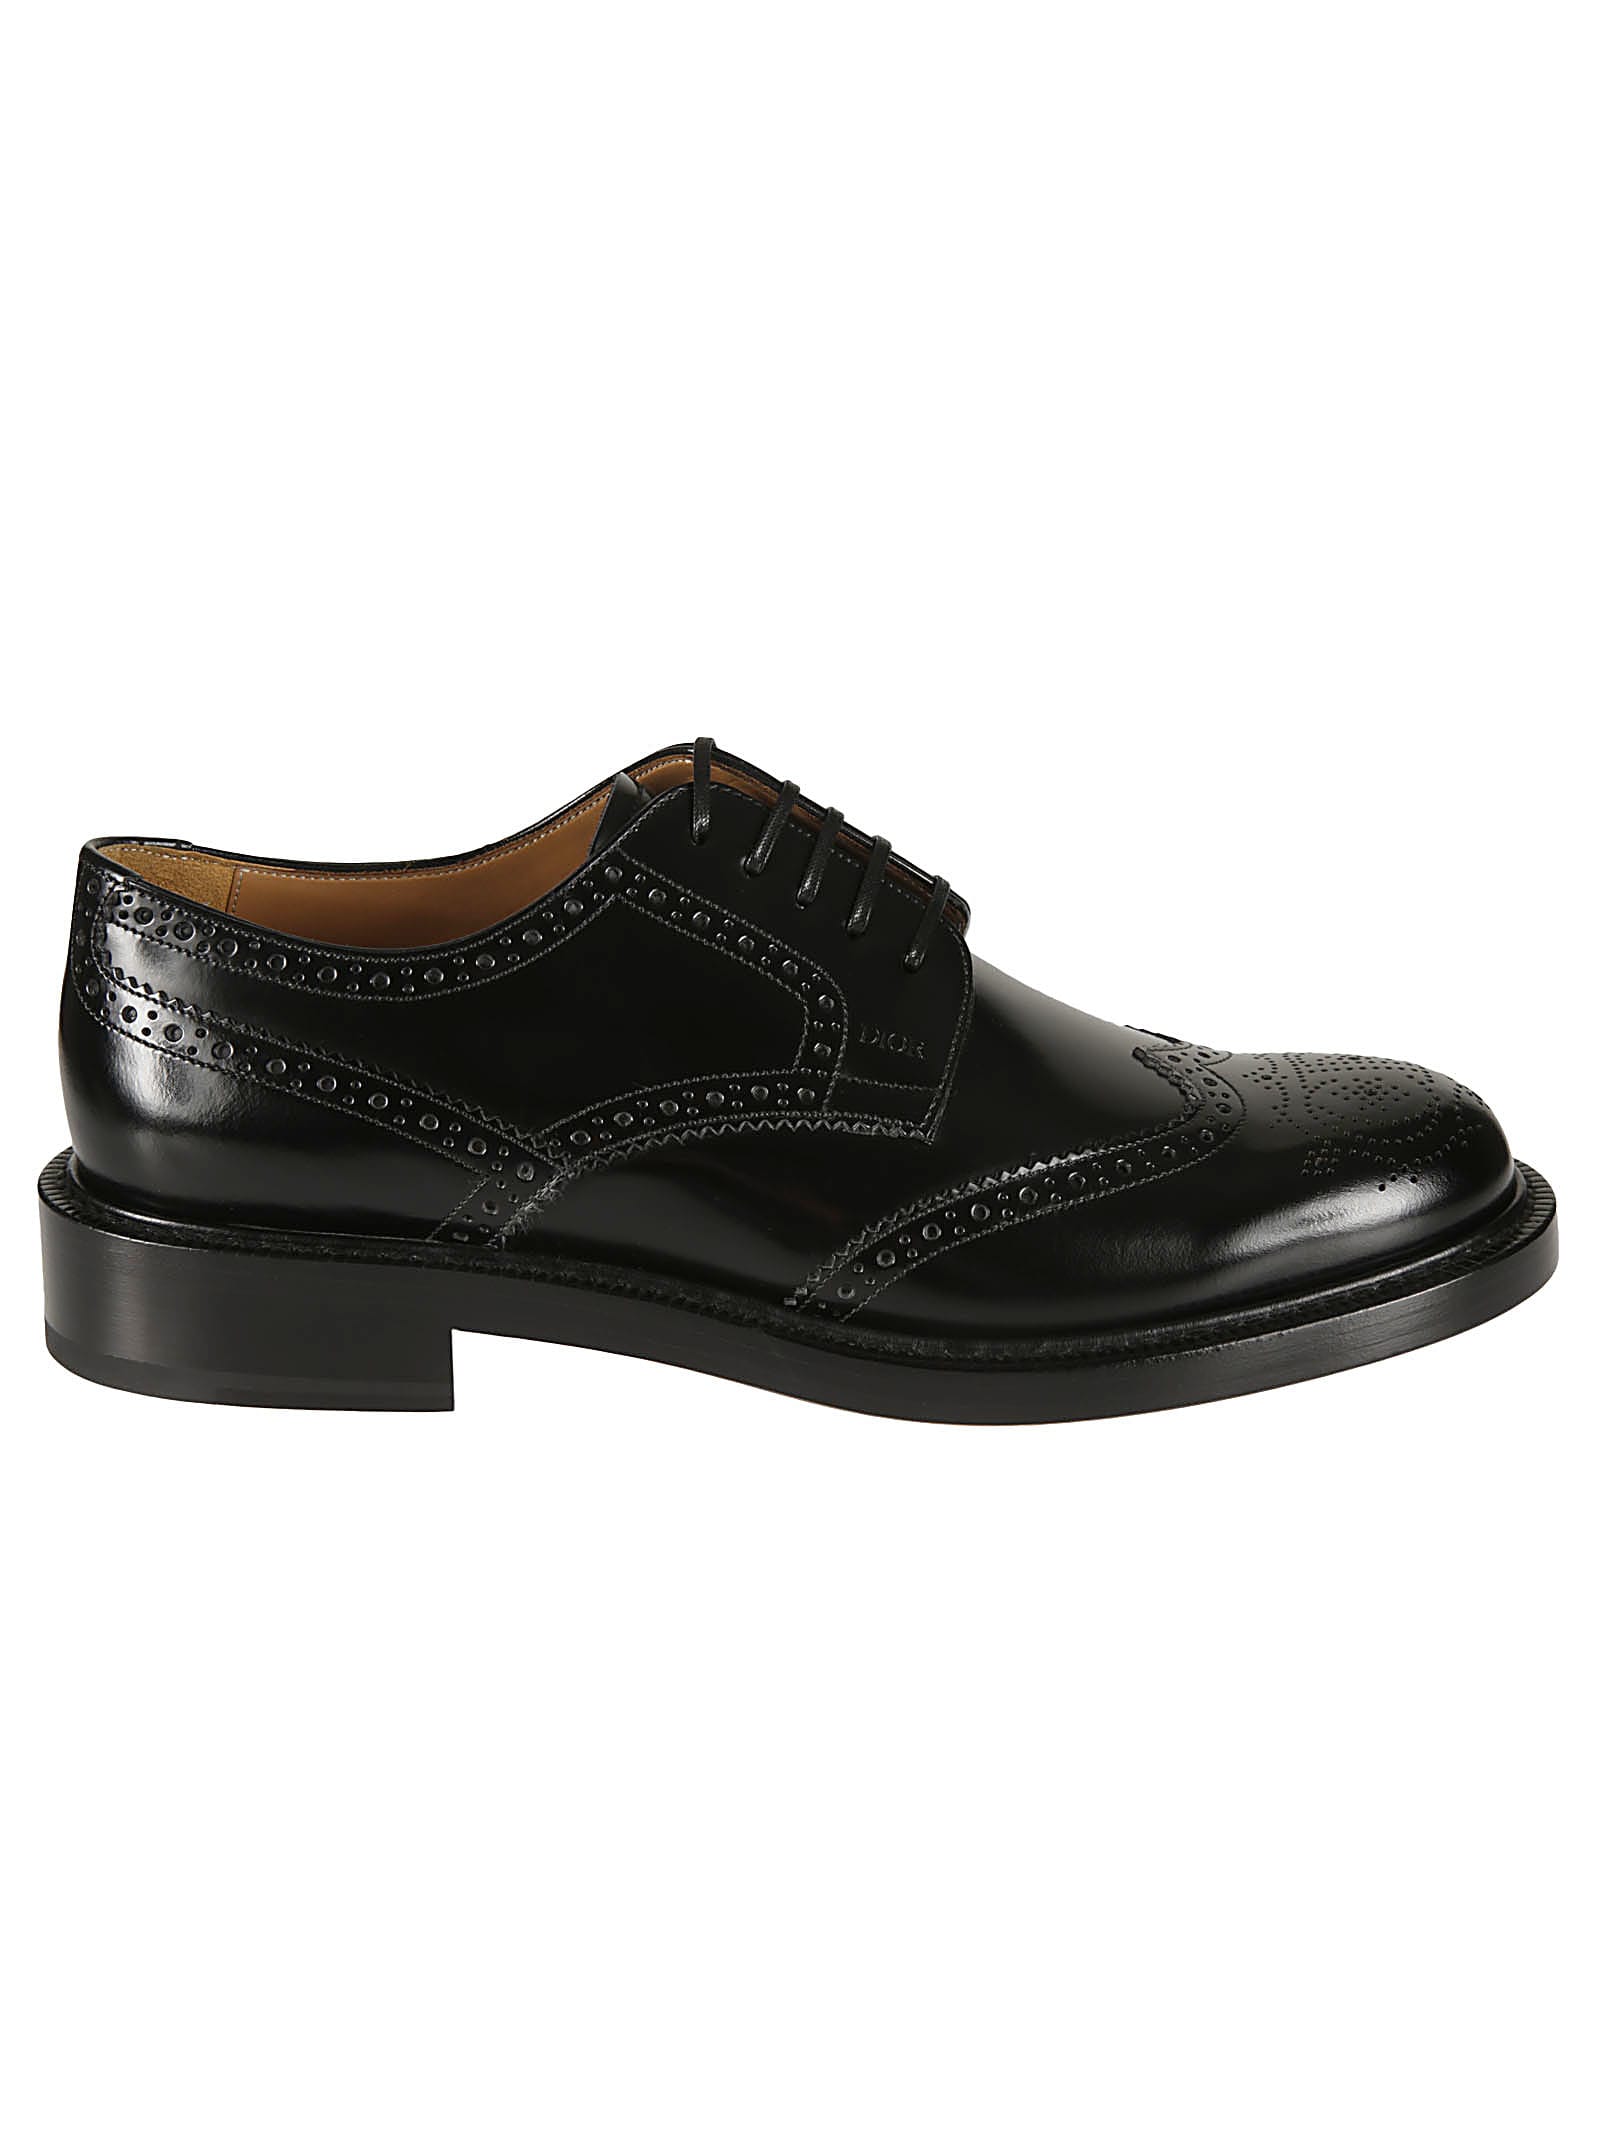 Dior Evidence Perforated Derby Shoes In Black | ModeSens